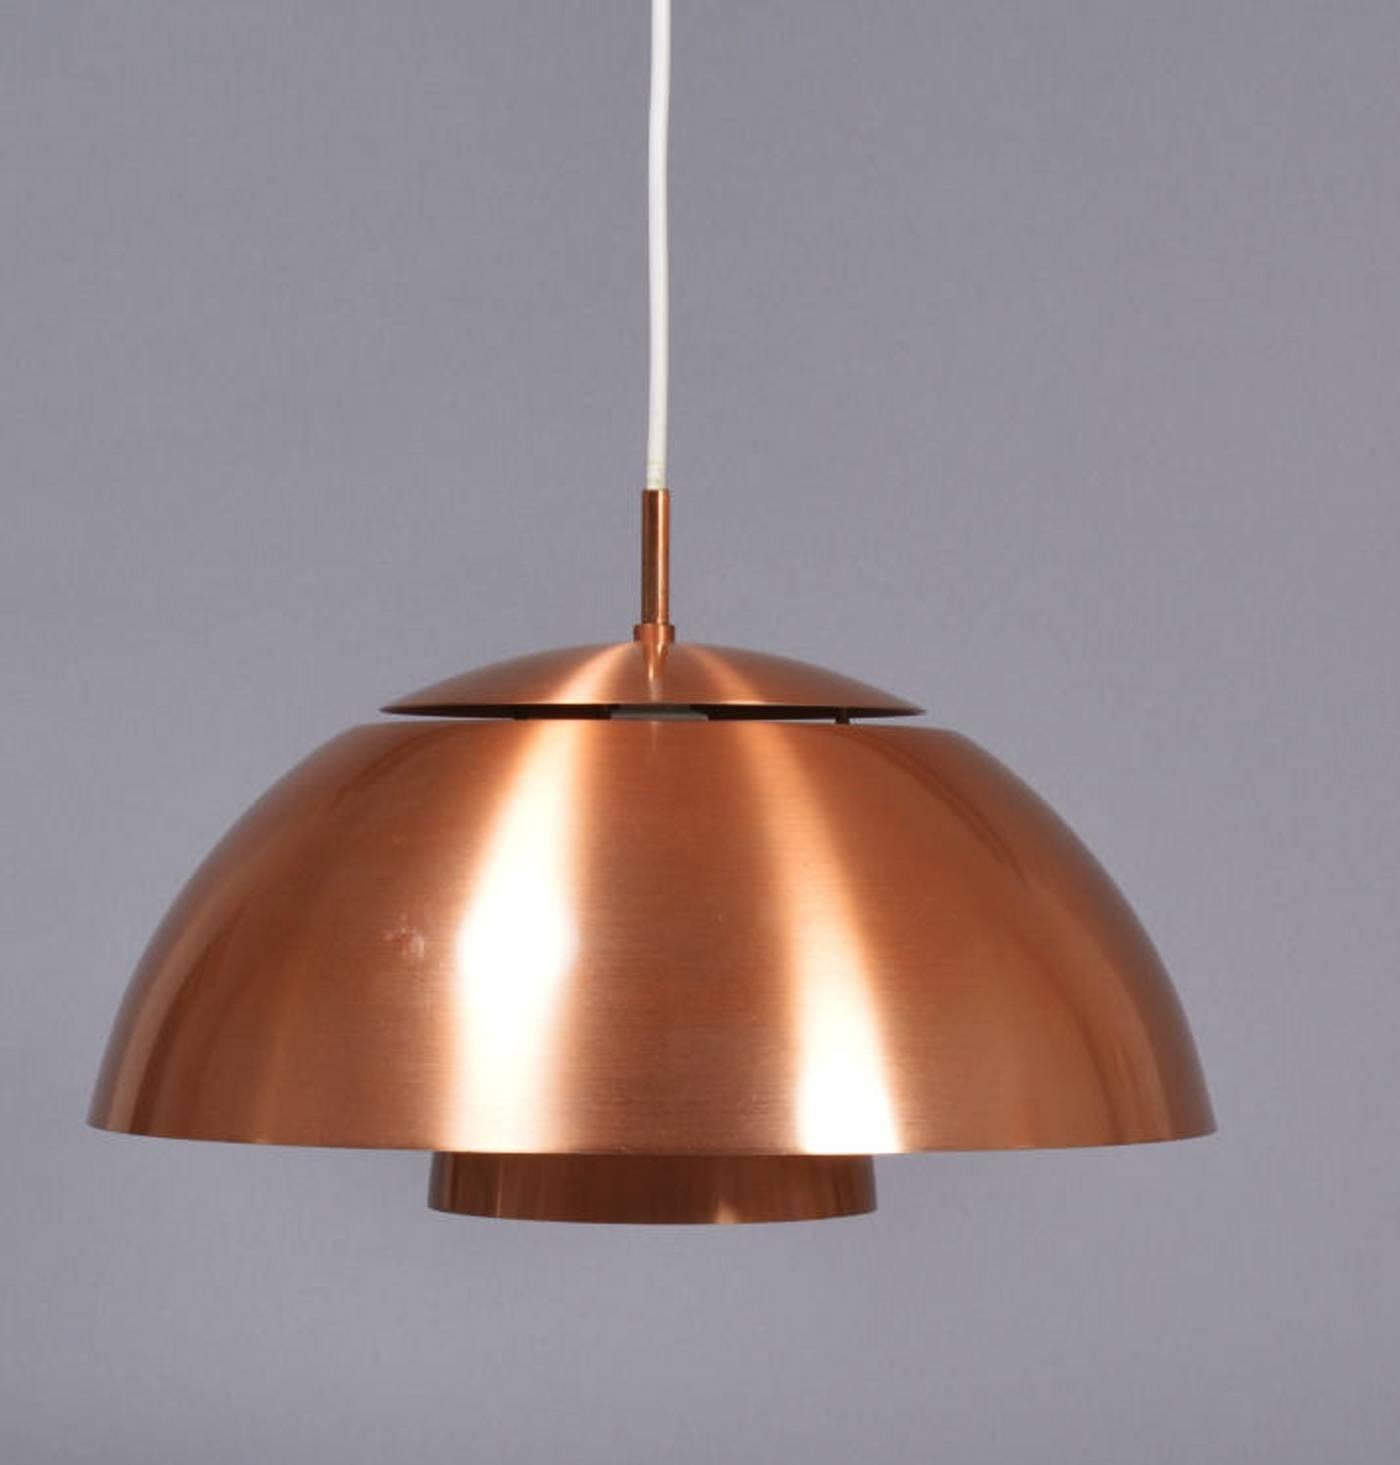 Manufactured by Lyfa in Denmark in the 1970s. Designed as the Olymp model, this pendant is fitted with one E27 socket and is perfectly suited for installation in any dining room, bedroom, or study. In great original condition with typical wear for